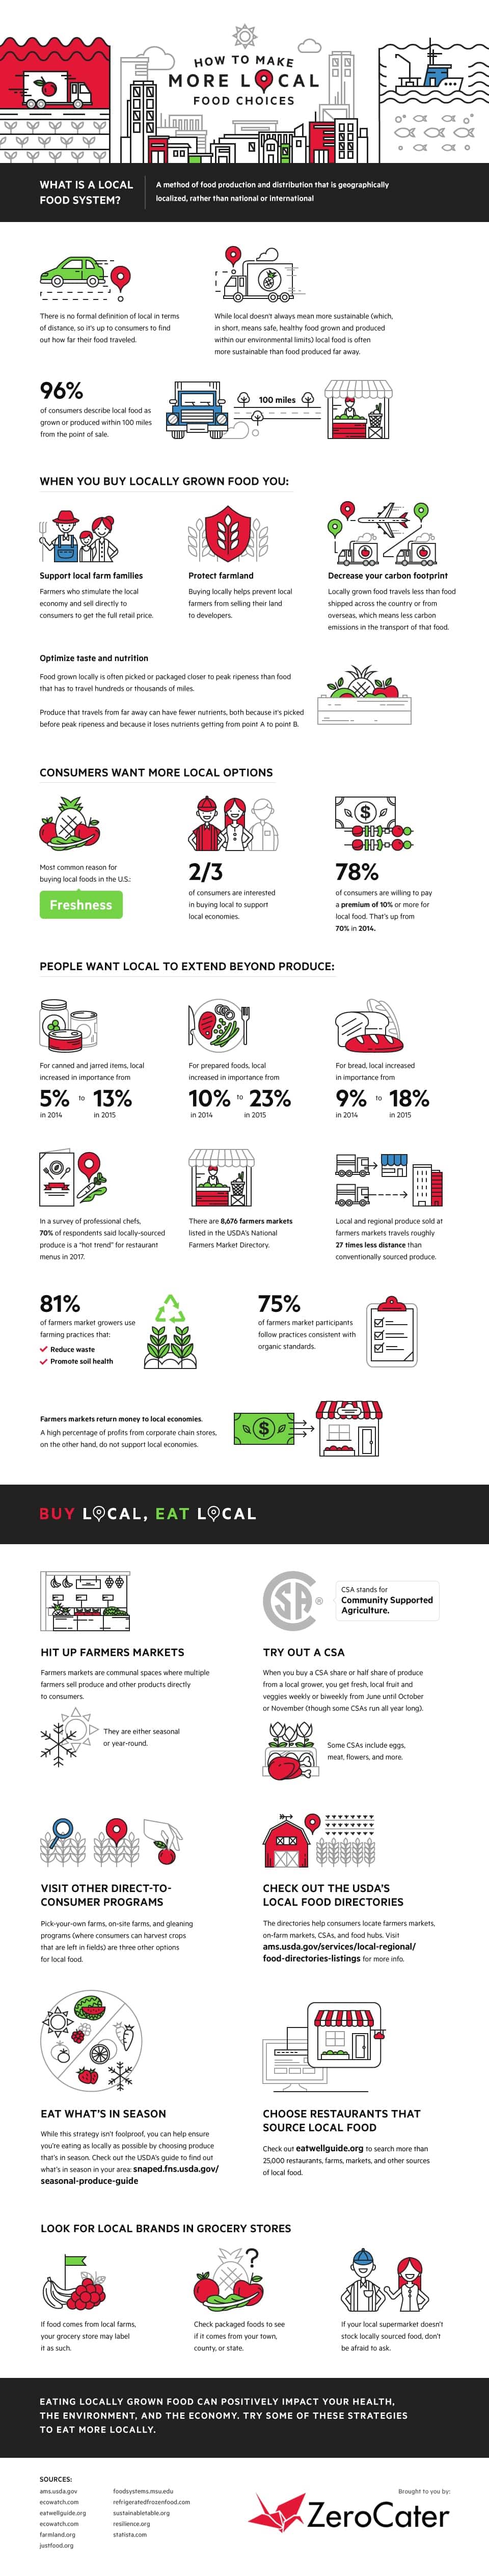 How To Make More Local Food Choices InfoGraphics